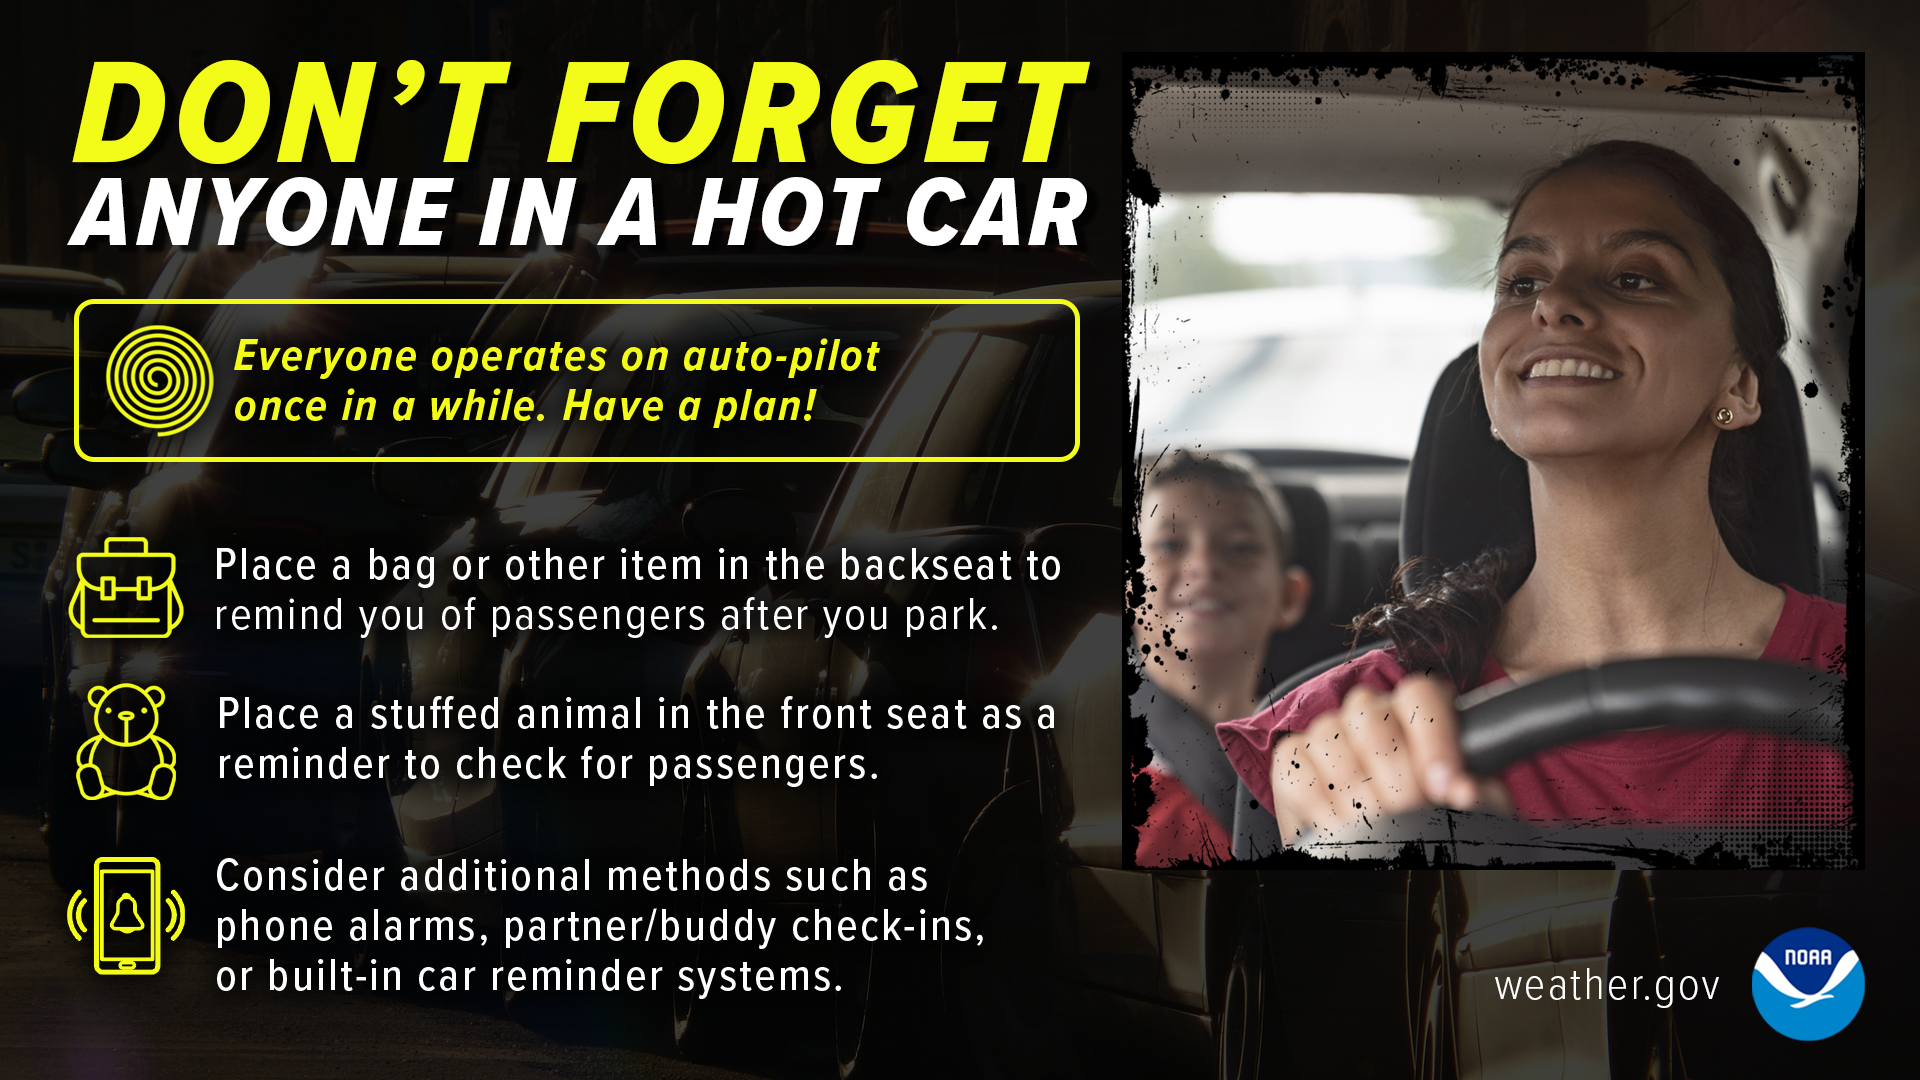 Dont' forget anyone in a hot car. Everyone operates on auto-pilot once in a while. Have a plan! Place a bag or other item in the backseat to remind you of passengers after you park. Place a stuffed animal in the front seat as a reminder to check for passengers. Consider additional methods such as phone alarms, partner/buddy check-ins, or built-in car reminder systems.